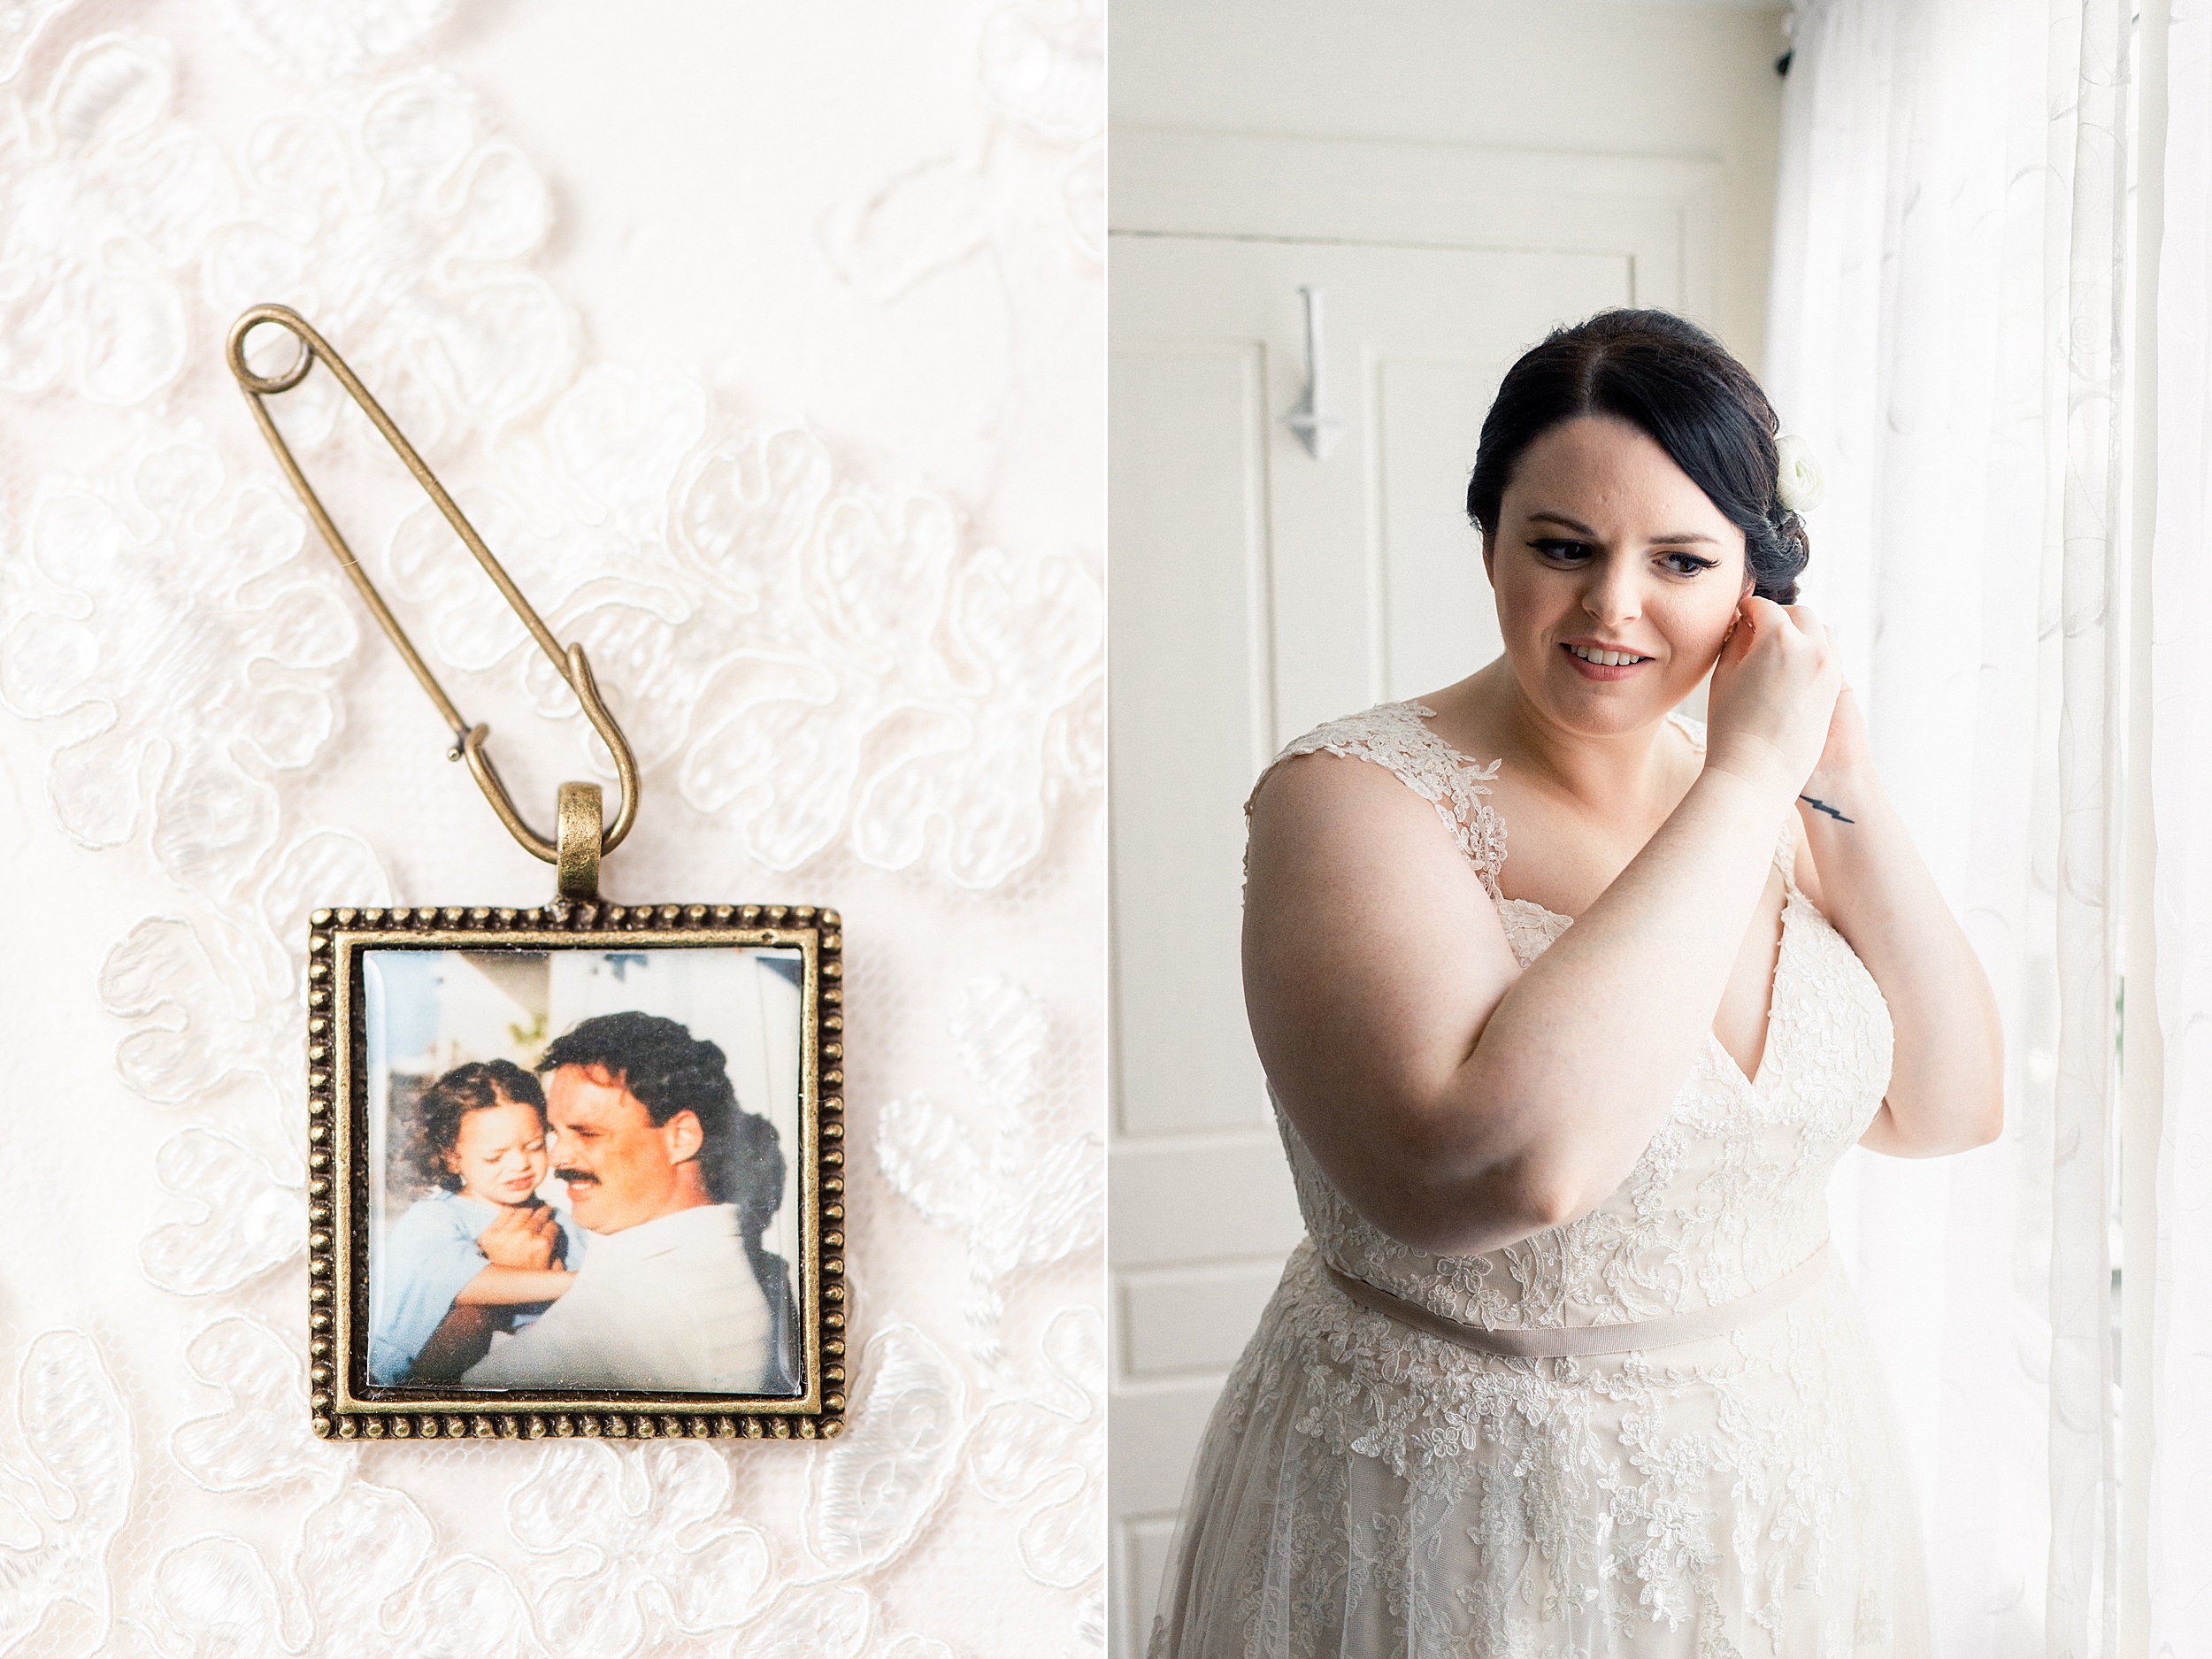 bride in lace dress puts on earrings before wedding ceremony and carries photo of father on her bouquet